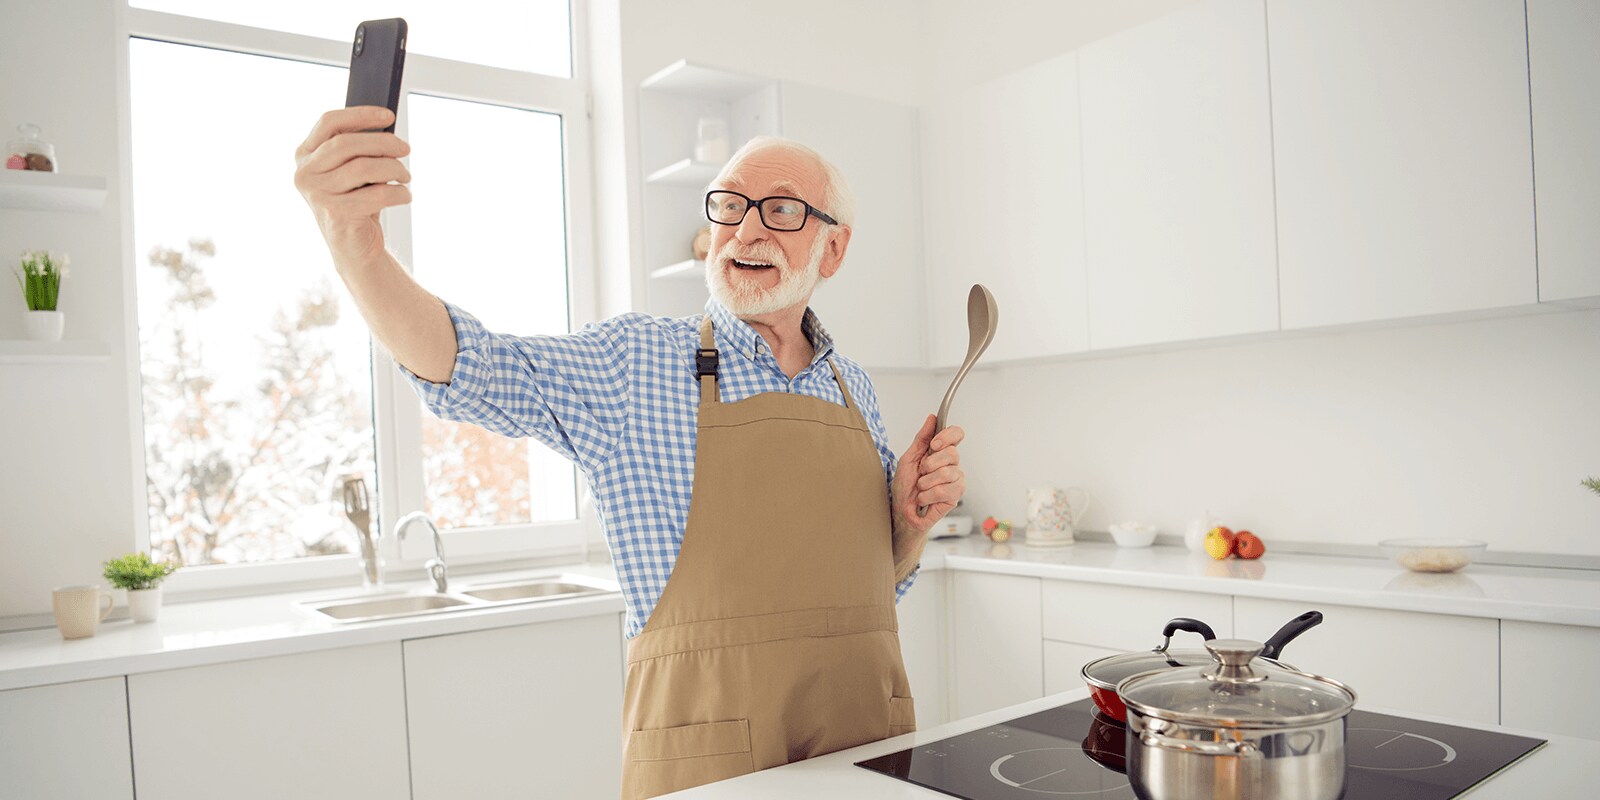 Image of a senior citizen cooking and talking a selfie